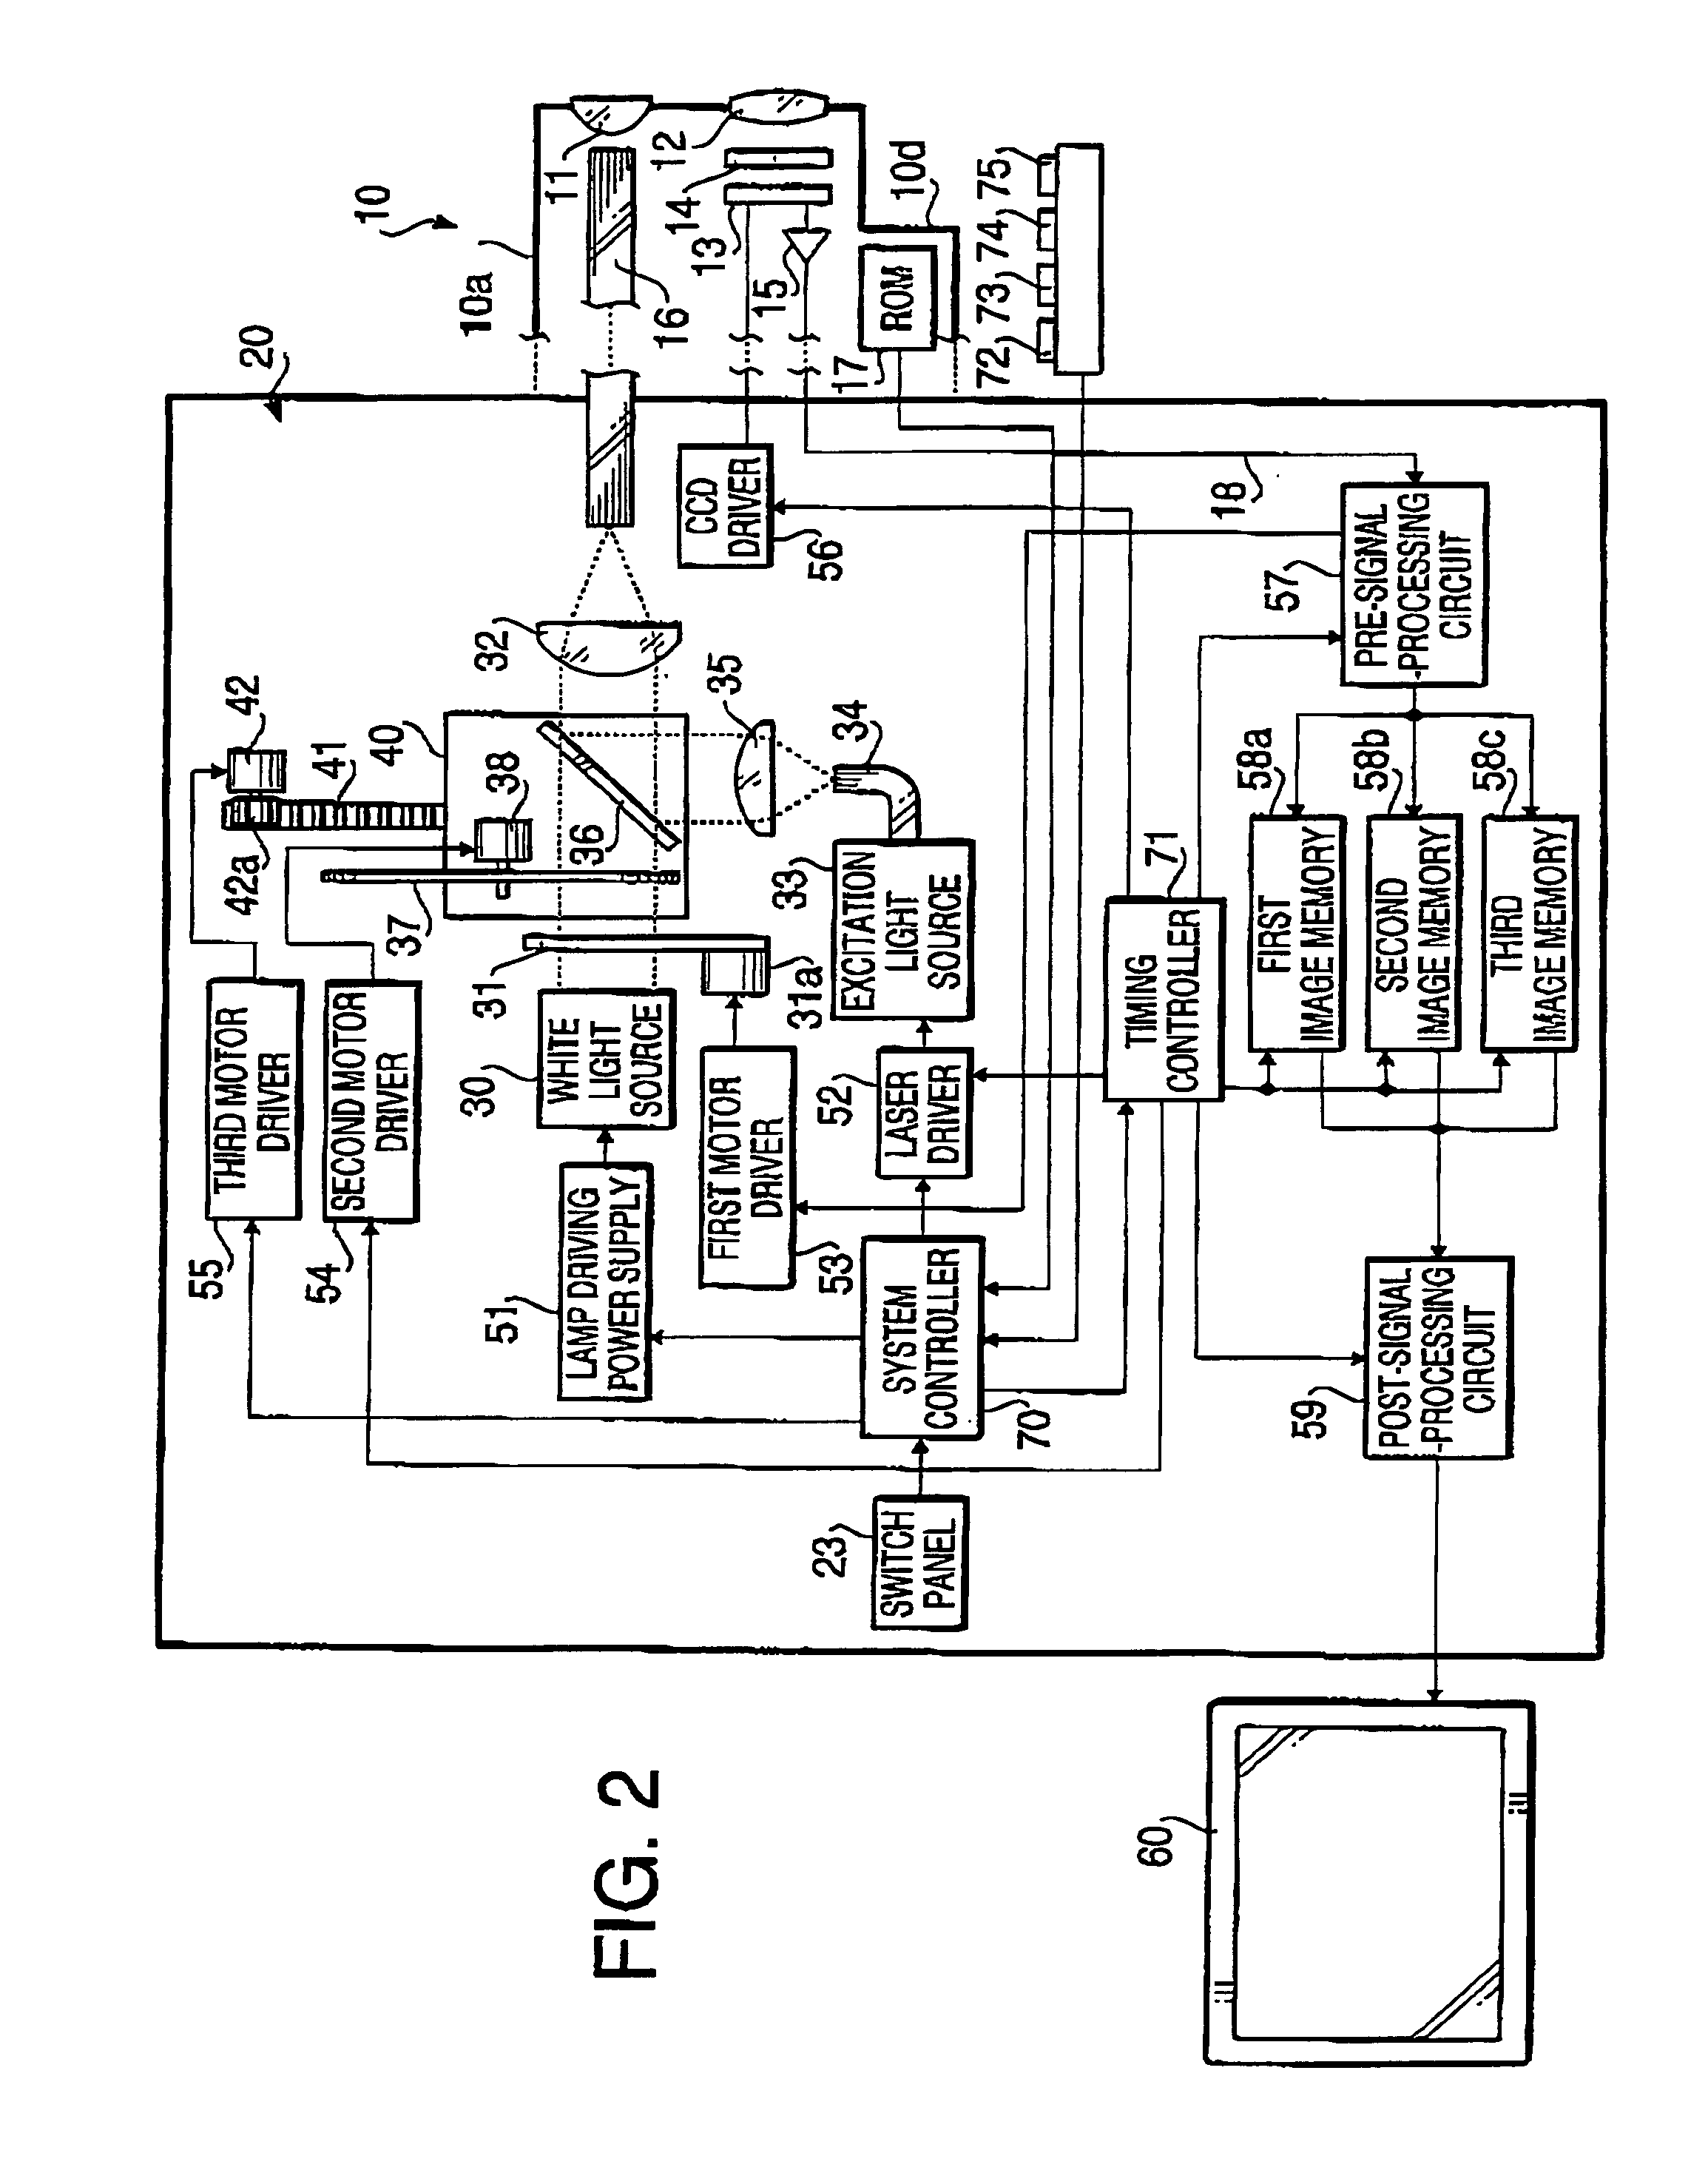 Electronic endoscope system capable of displaying a plurality of images